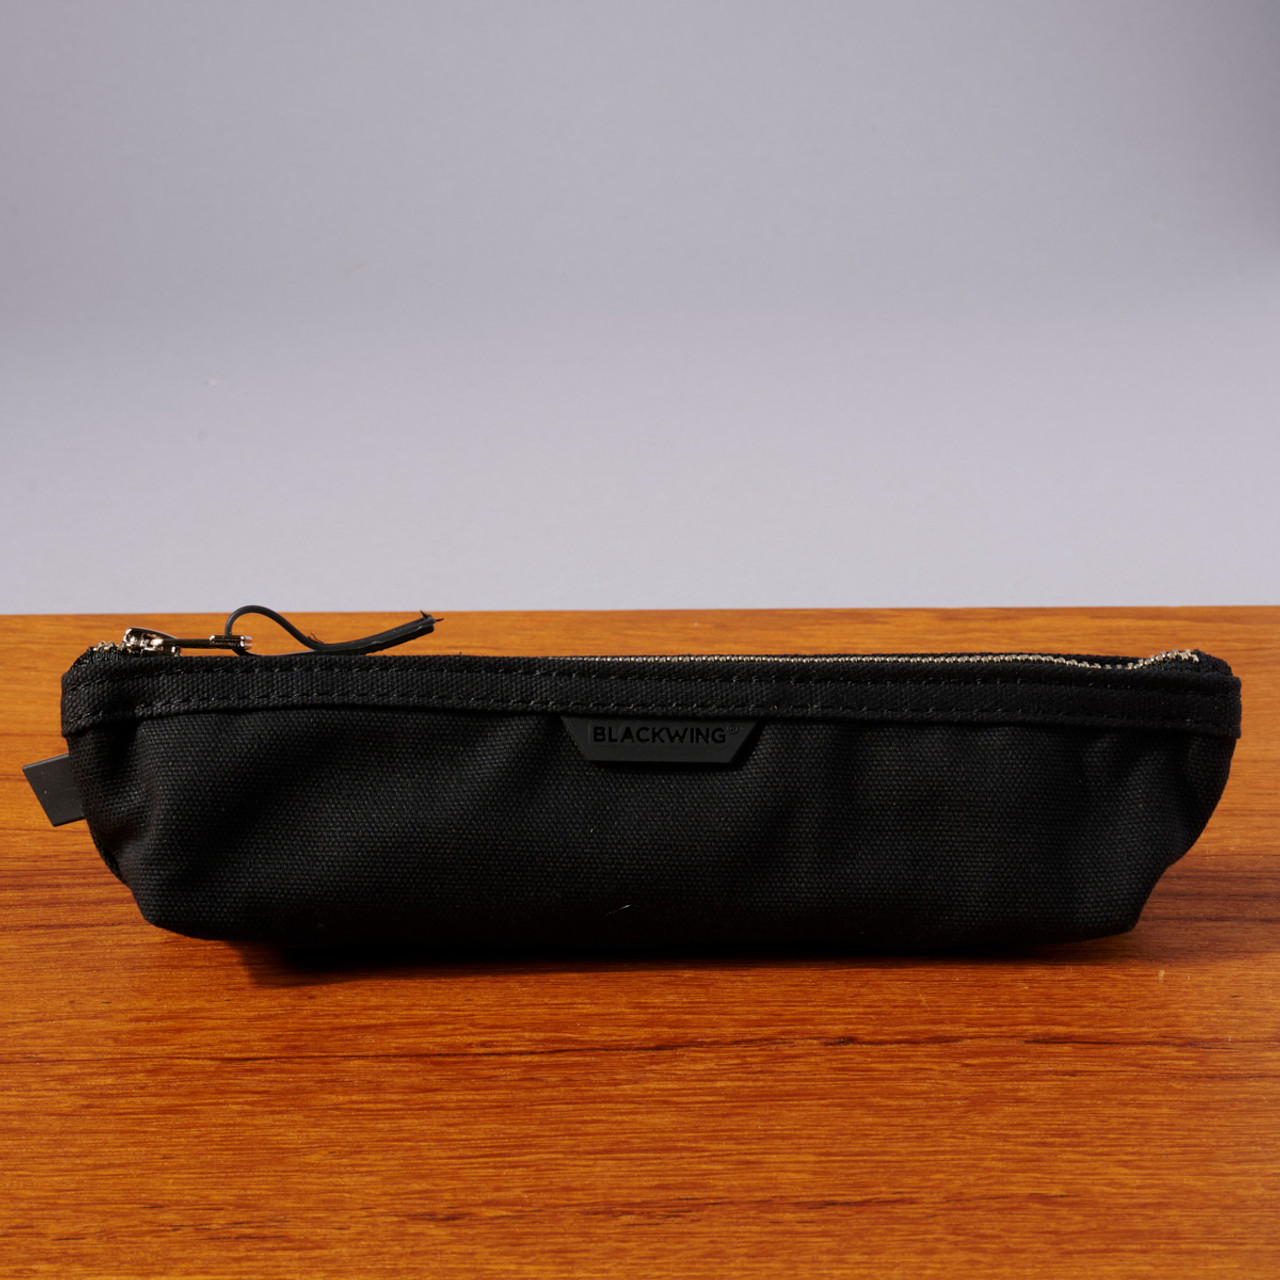 Blackwing Pencil Pouch - Holds 36 Blackwings